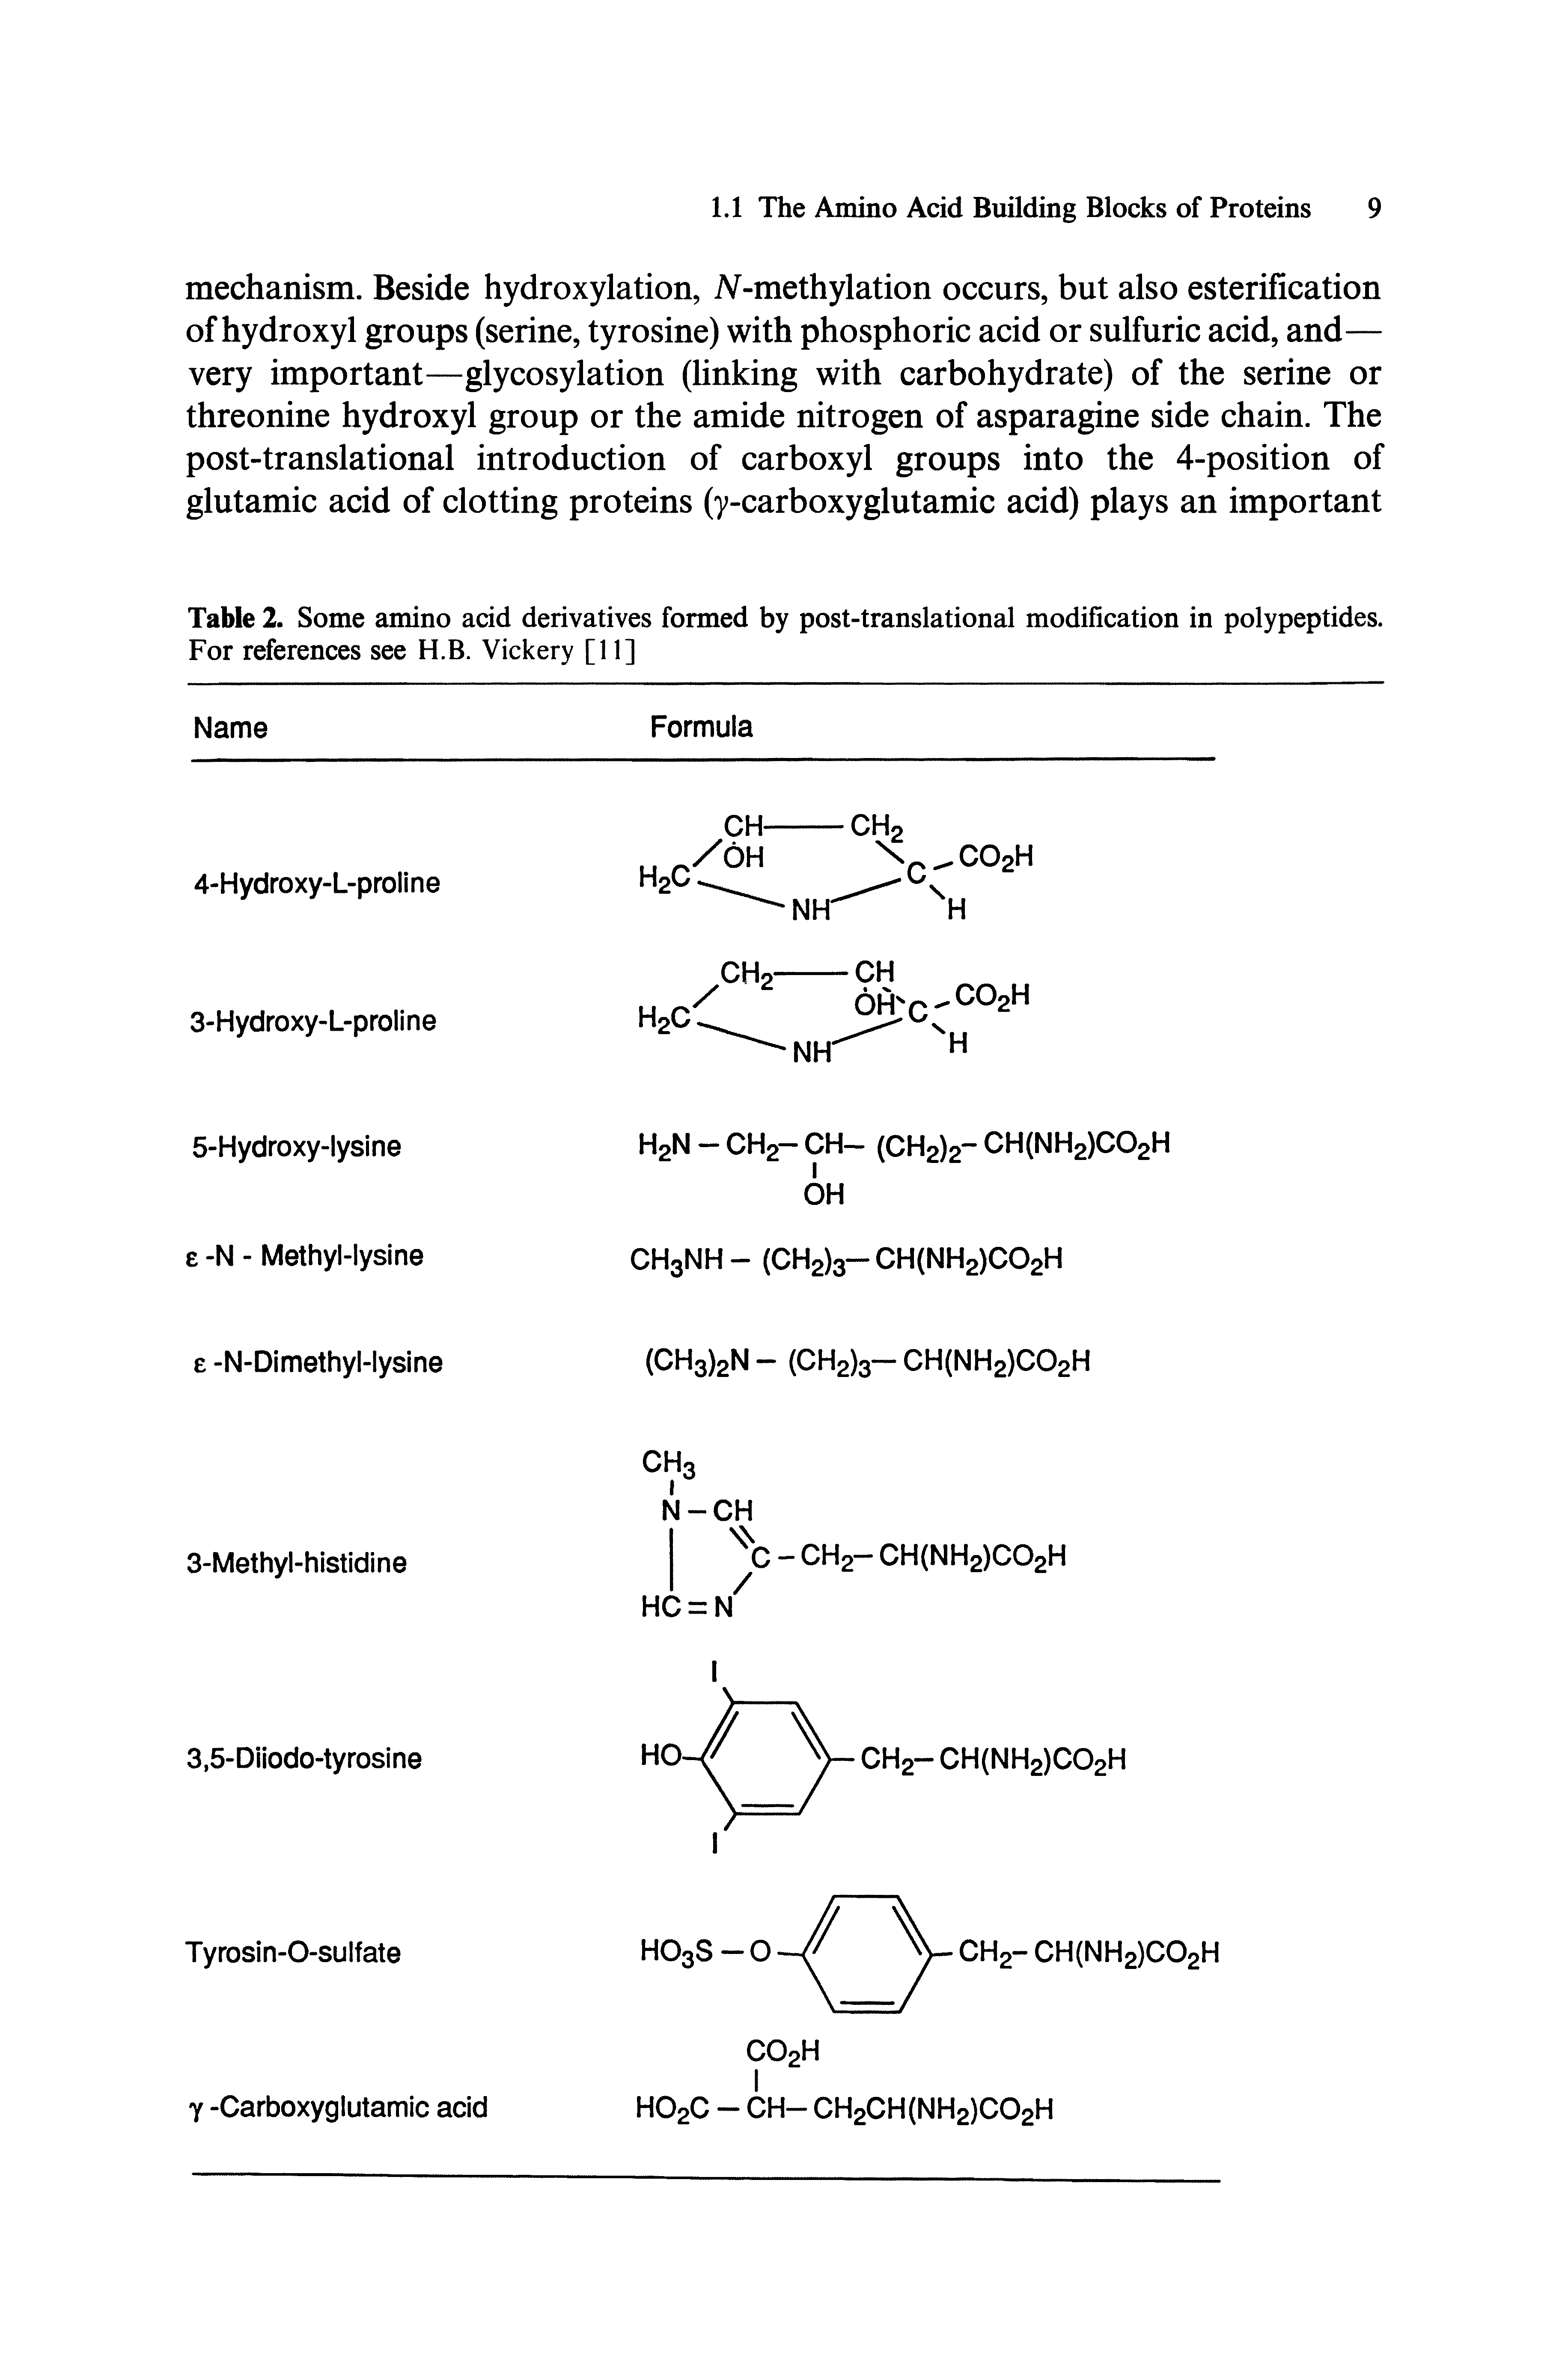 Table 2. Some amino acid derivatives formed by post-translational modification in polypeptides. For references see H.B. Vickery [11]...